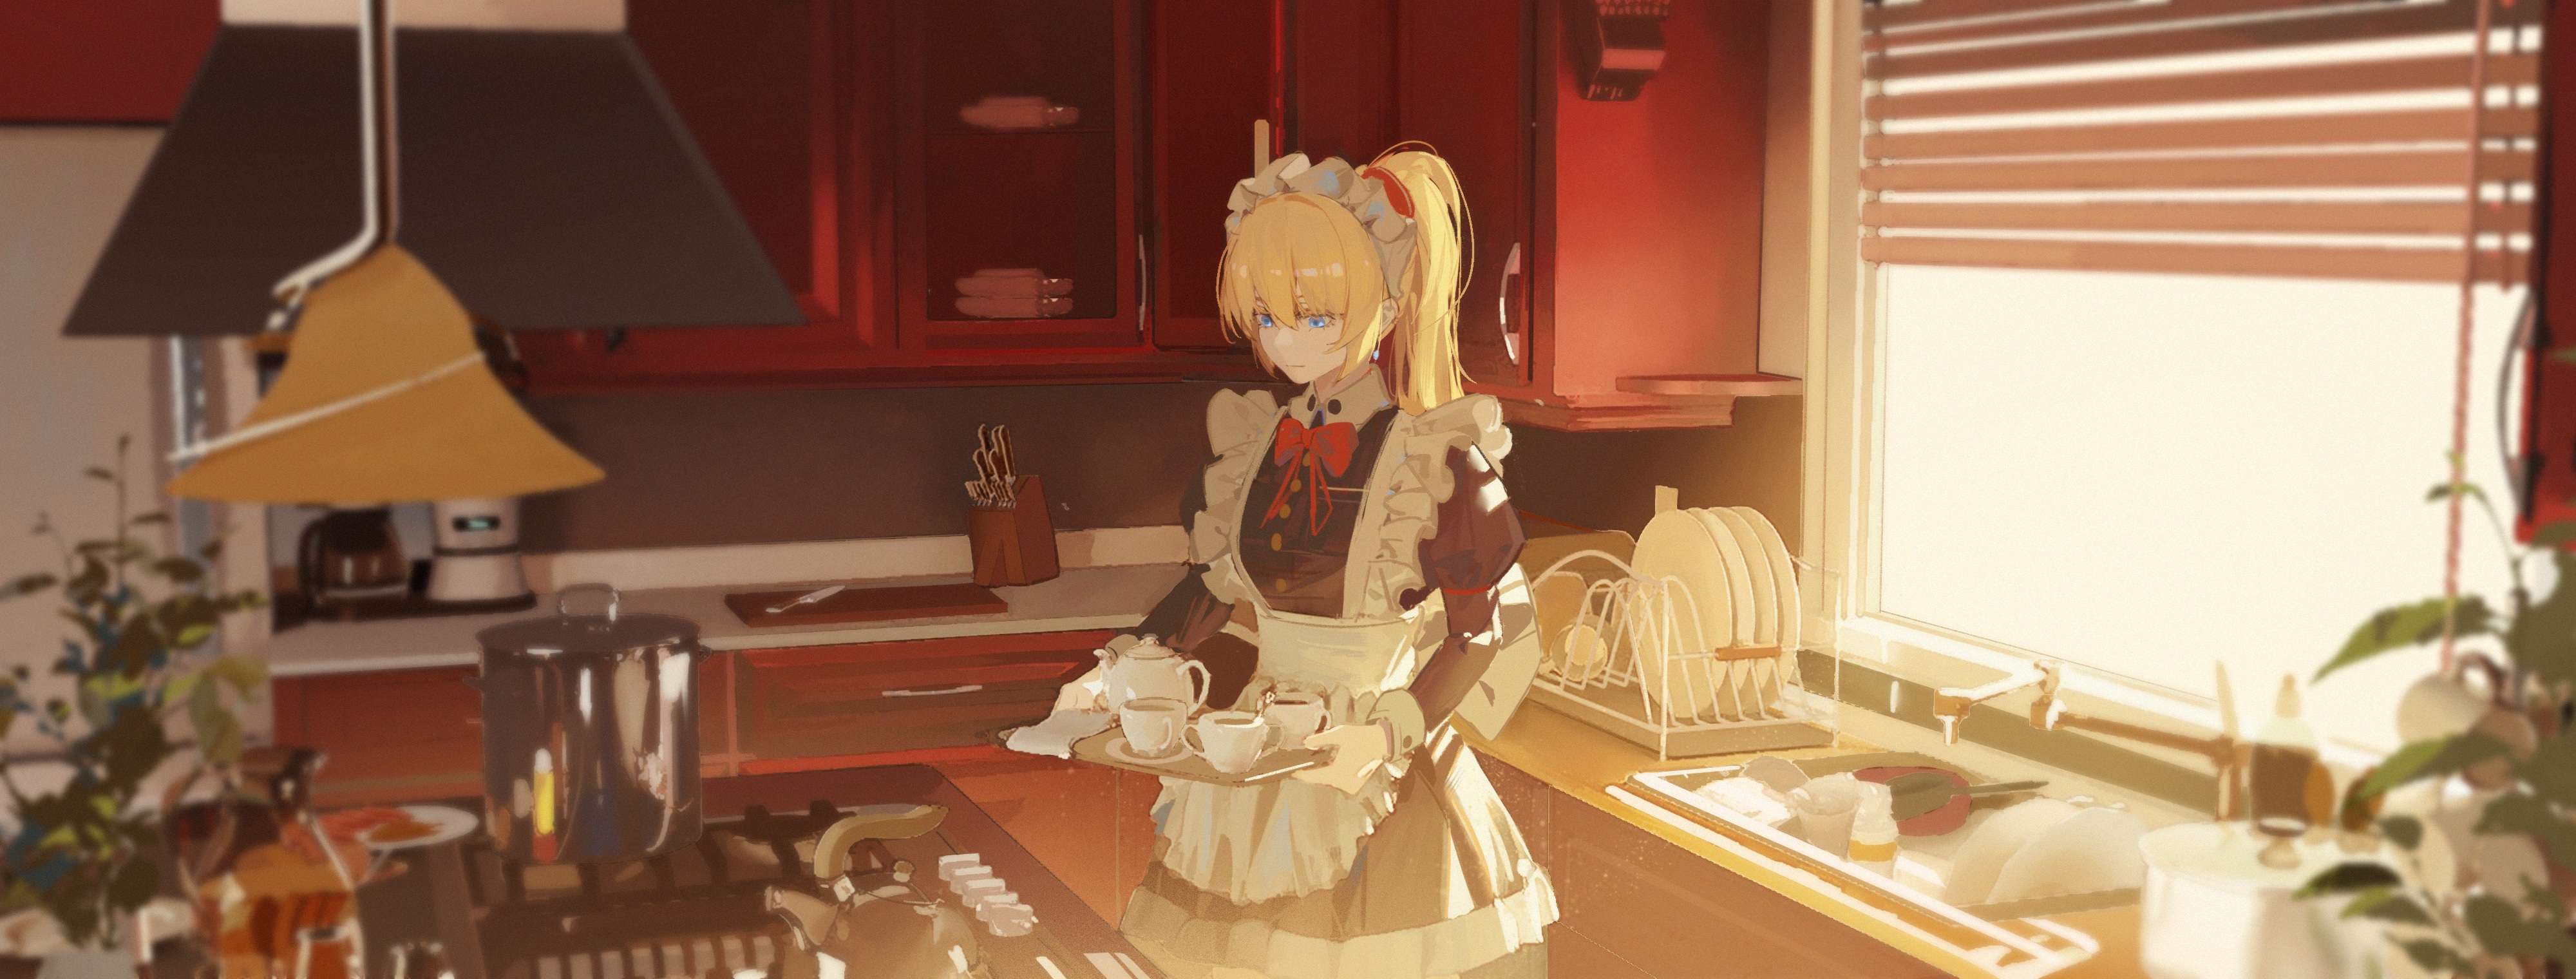 Anime Anime Girls Kitchen Cup Hotplate Machine Pot Tools Women Indoors Blonde Maid Maid Outfit Sink  4000x1520